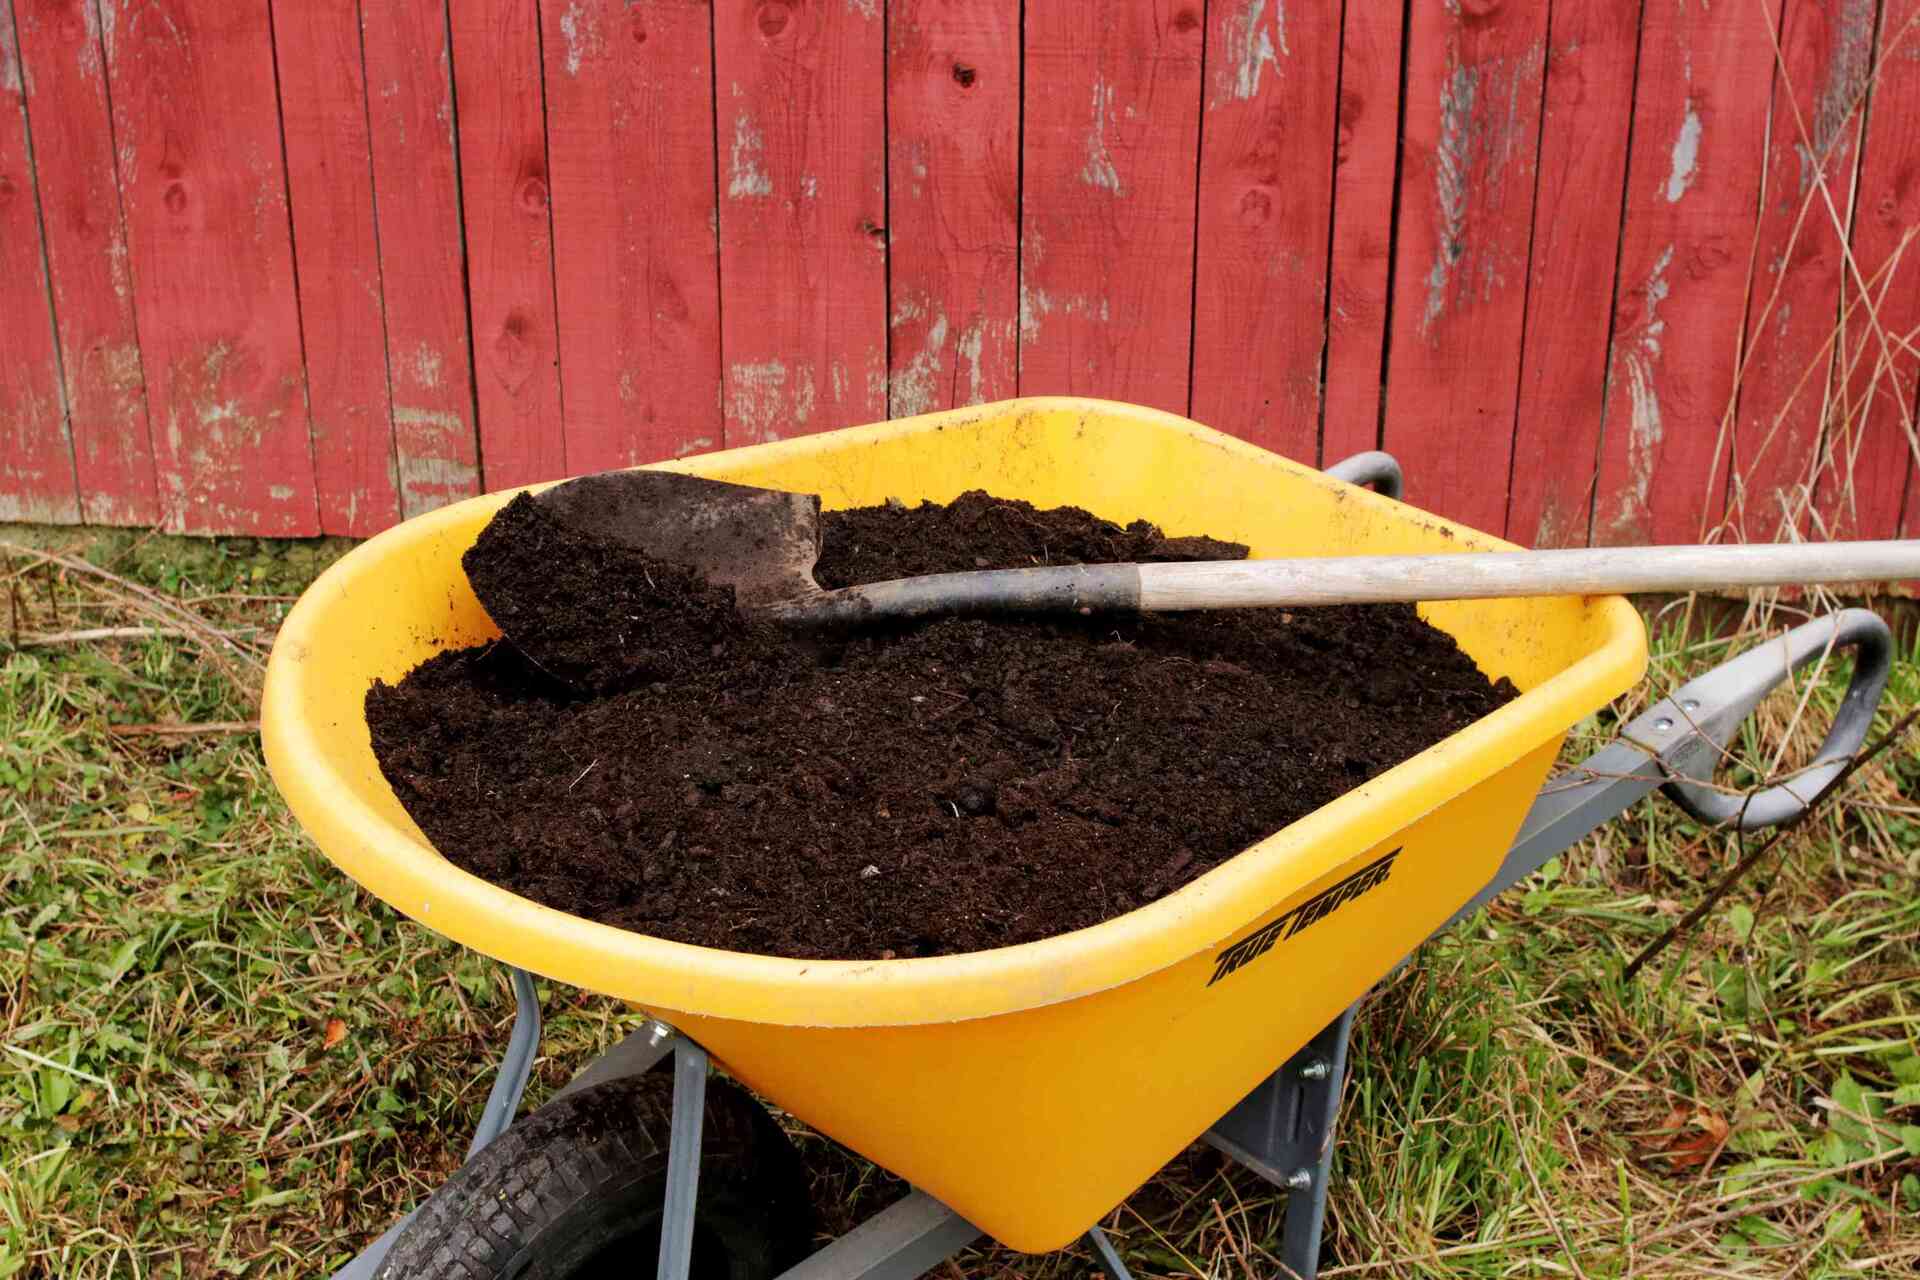 How To Store Dirt For Gardening, Landscaping, And Construction